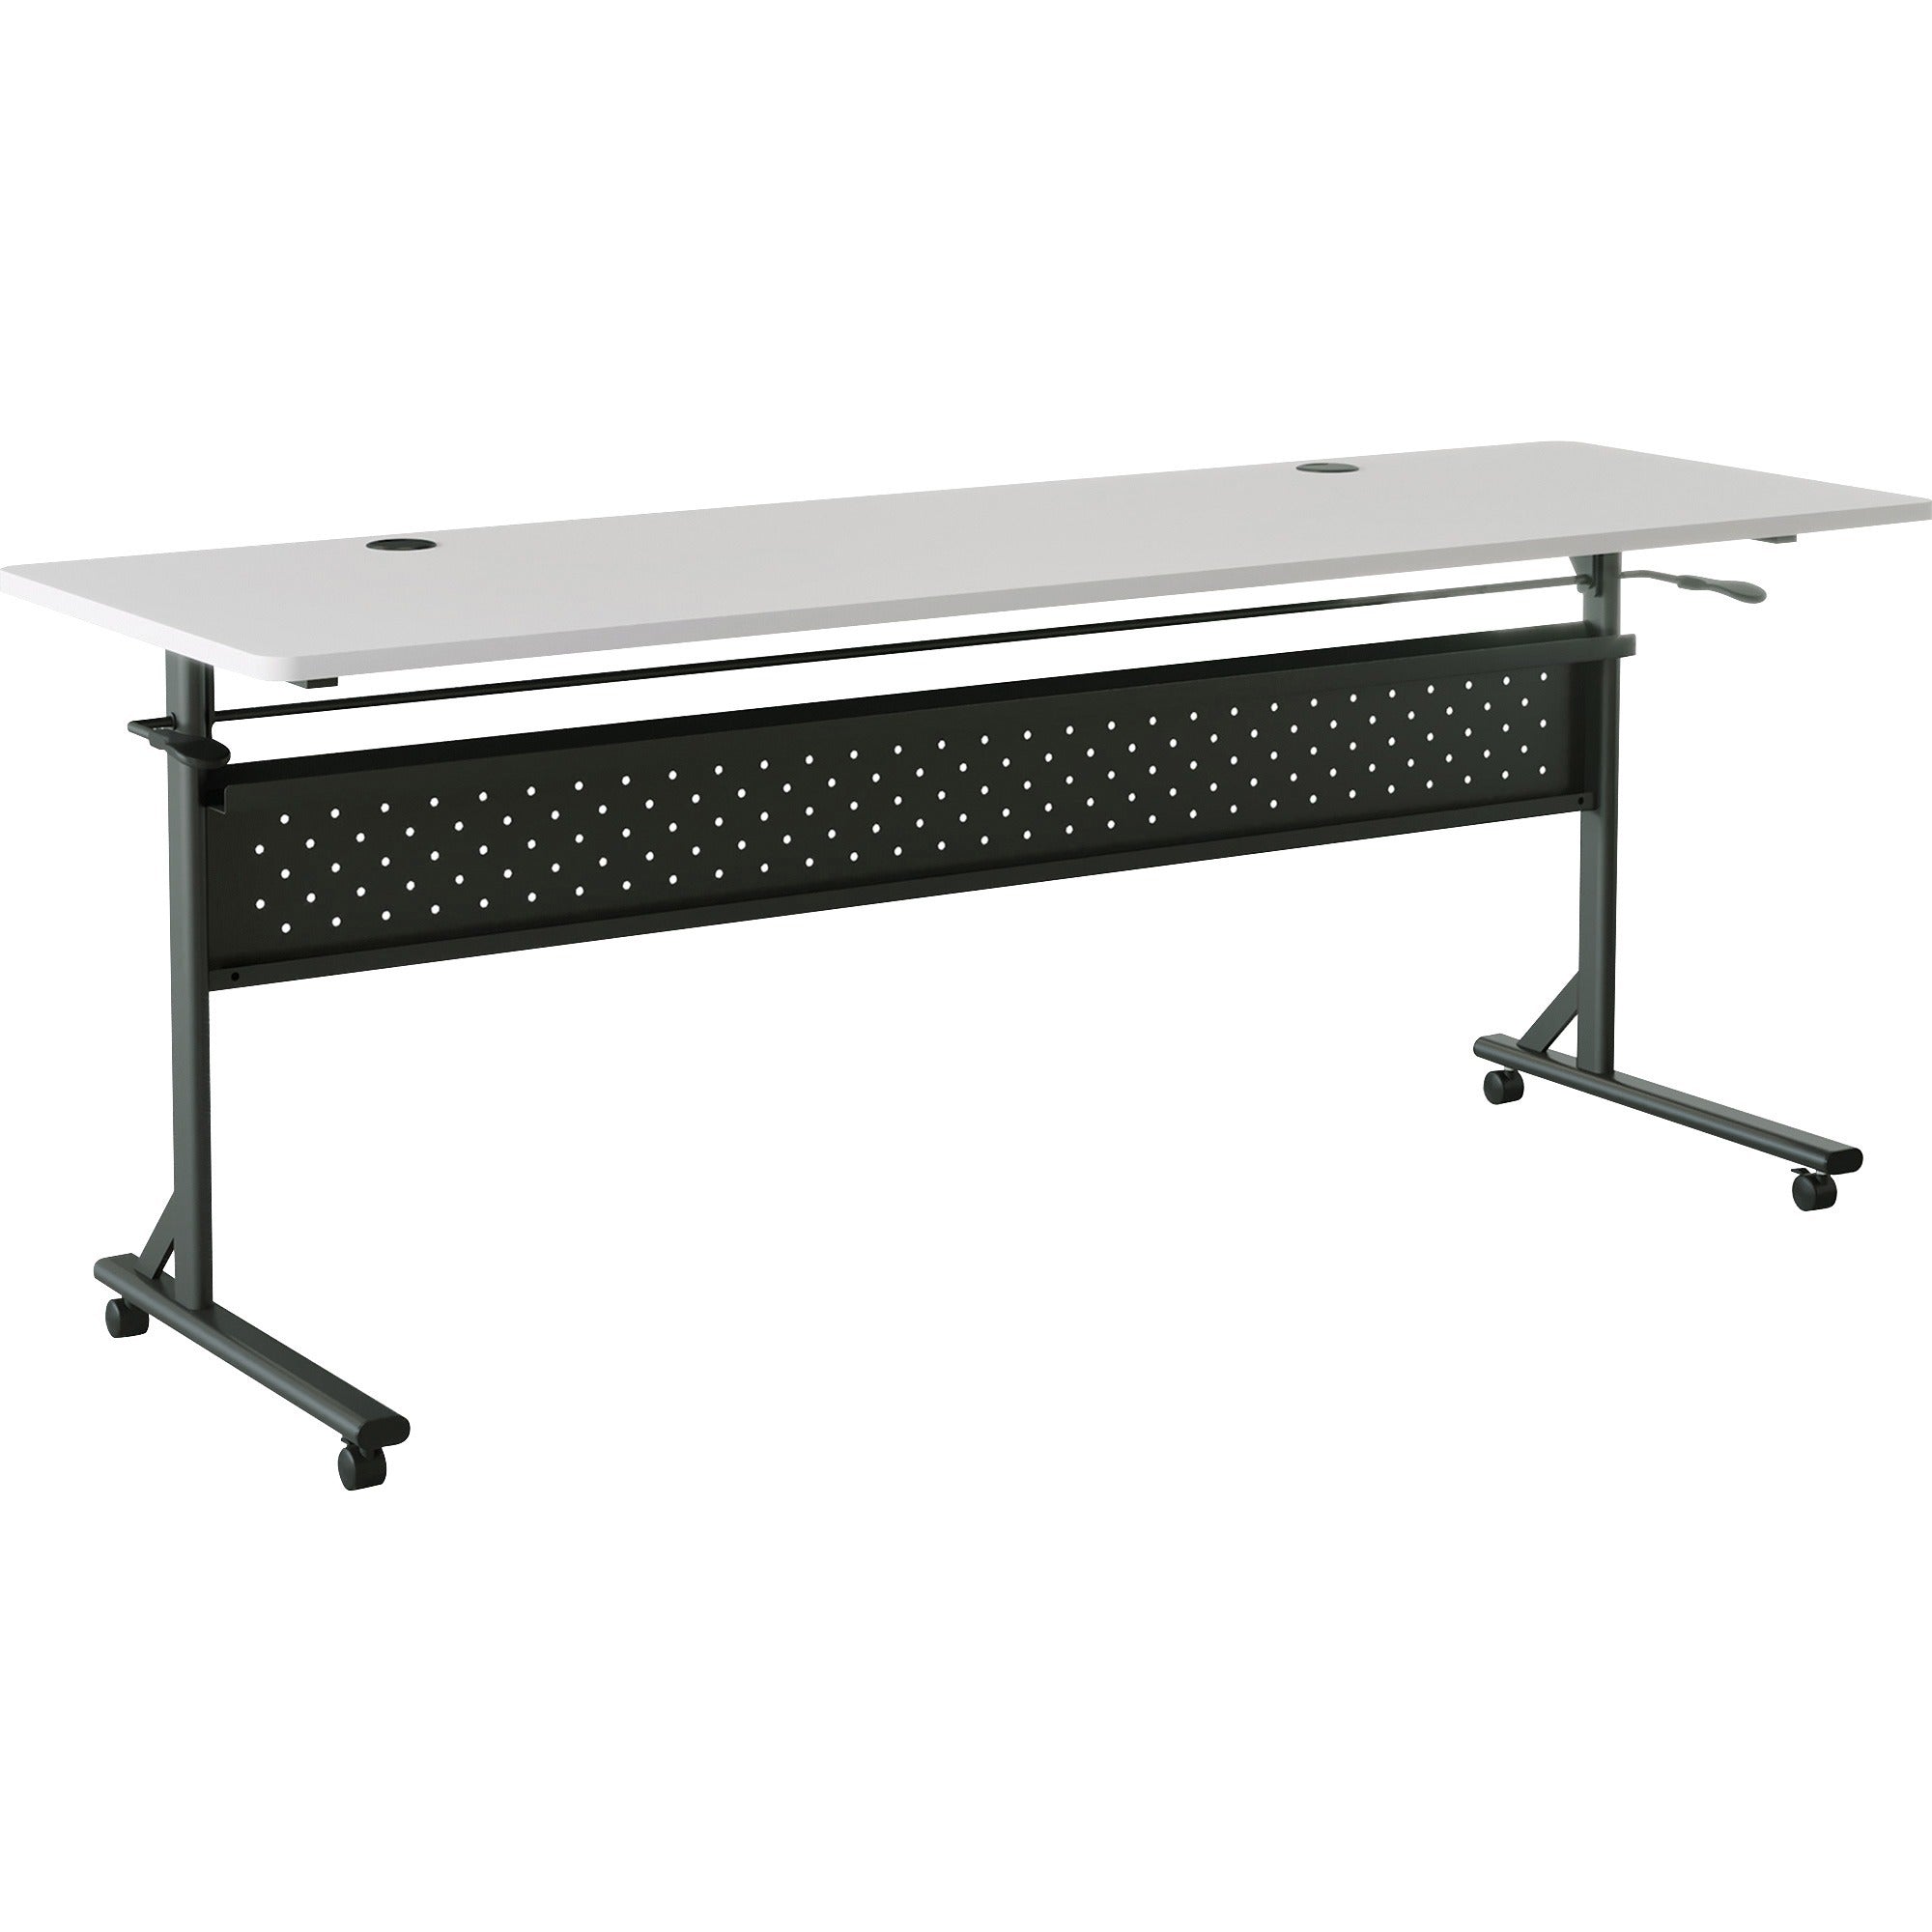 lorell-shift-20-flip-and-nesting-mobile-table-for-table-toplaminated-rectangle-top-72-table-top-length-x-24-table-top-width-x-1-table-top-thickness-2950-height-assembly-required-gray-1-each_llr60767 - 1